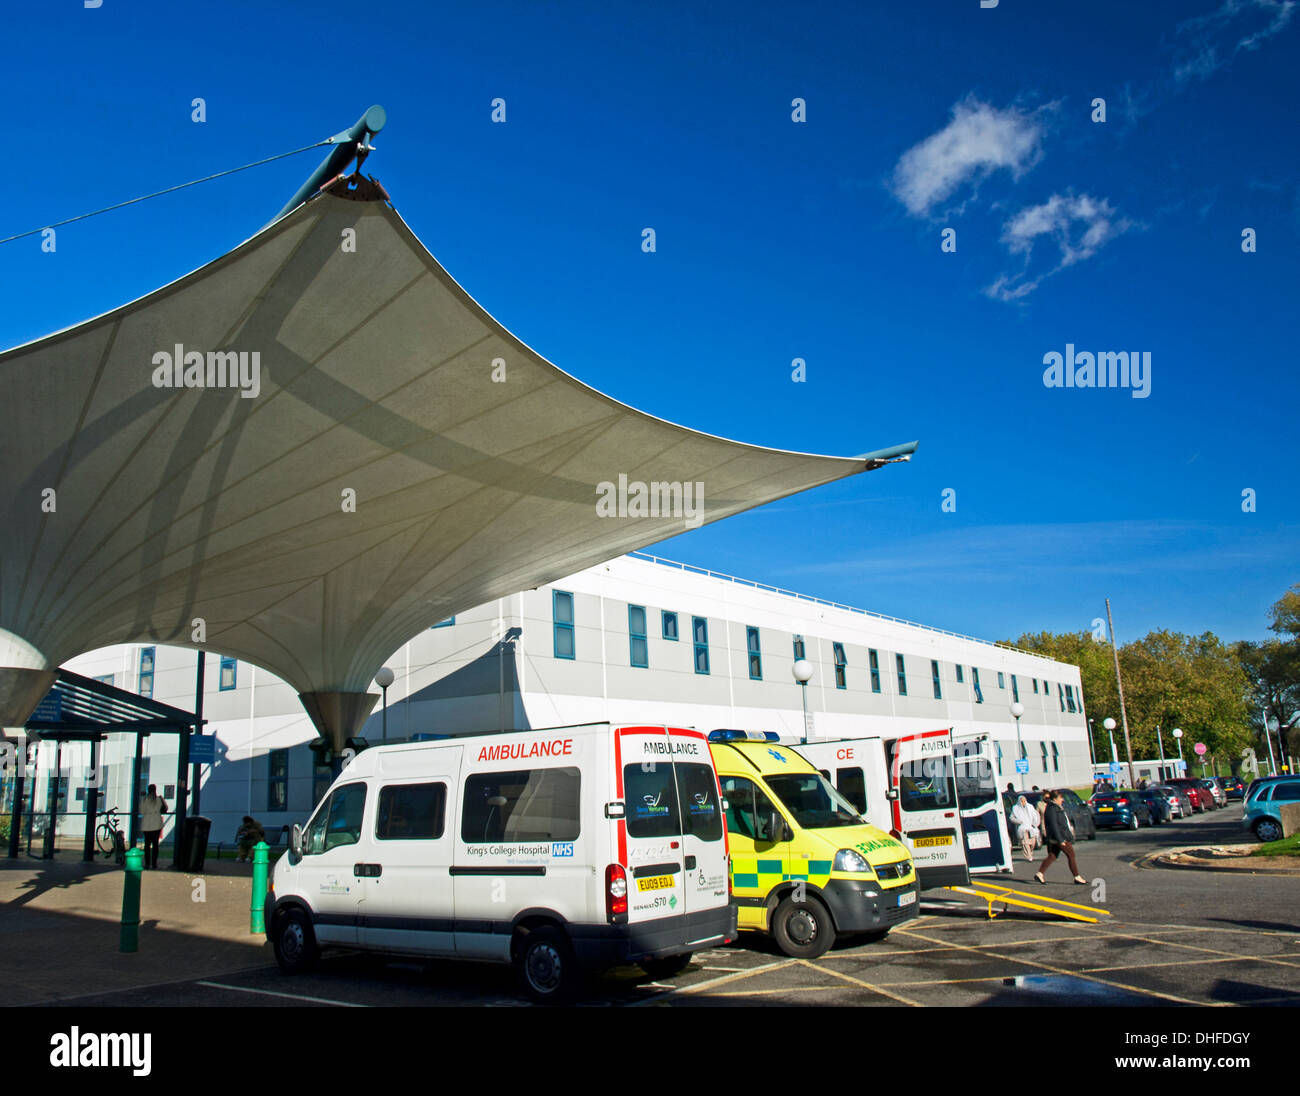 Ambulances parked in front of Queen Elizabeth Hospital, Woolwich, South East London, Greater London, England, United Kingdom Stock Photo